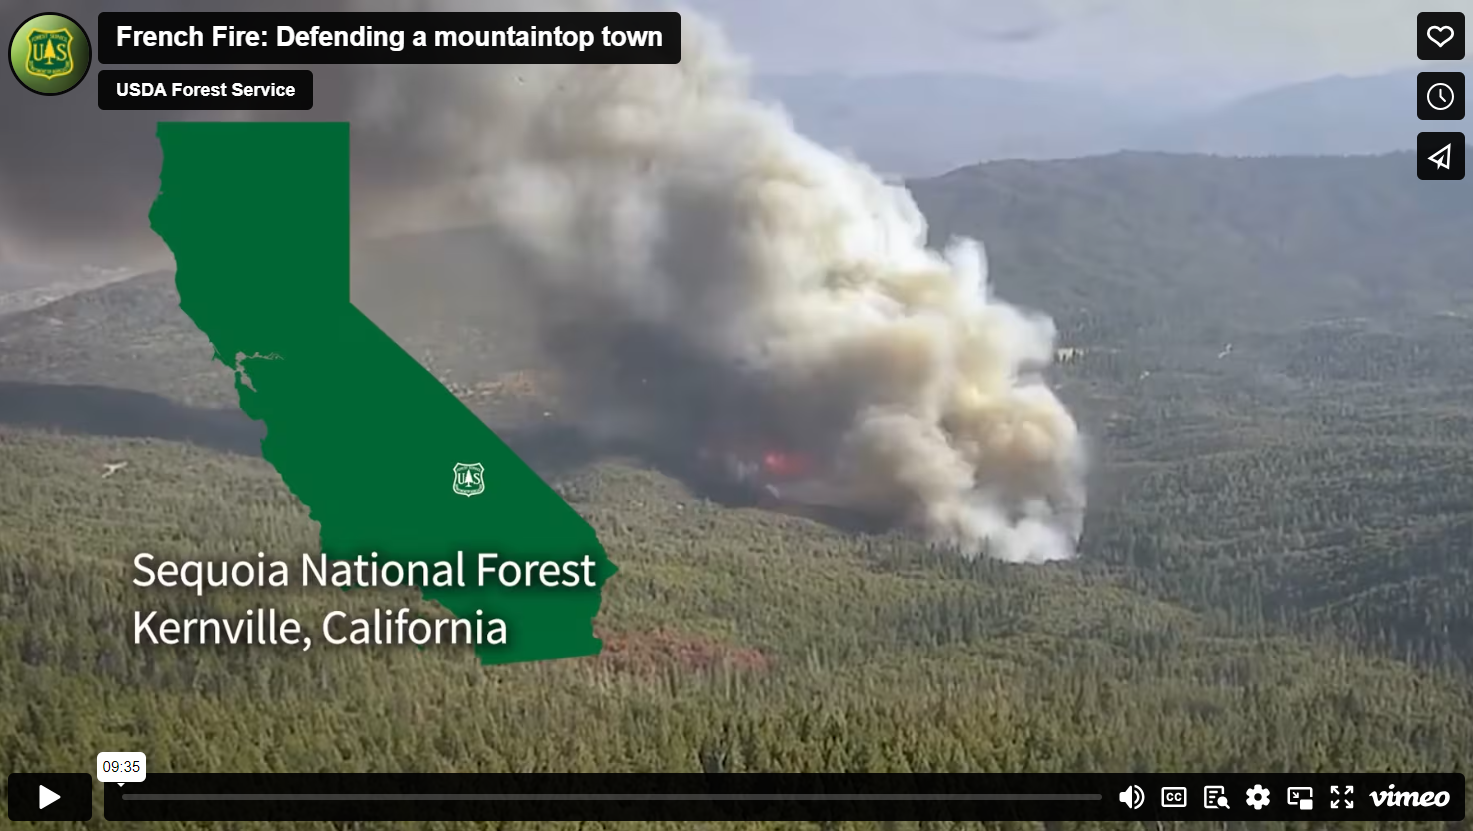 Video player for Forest News Episode 23 on the topic of French Fire: Defending a mountaintop town